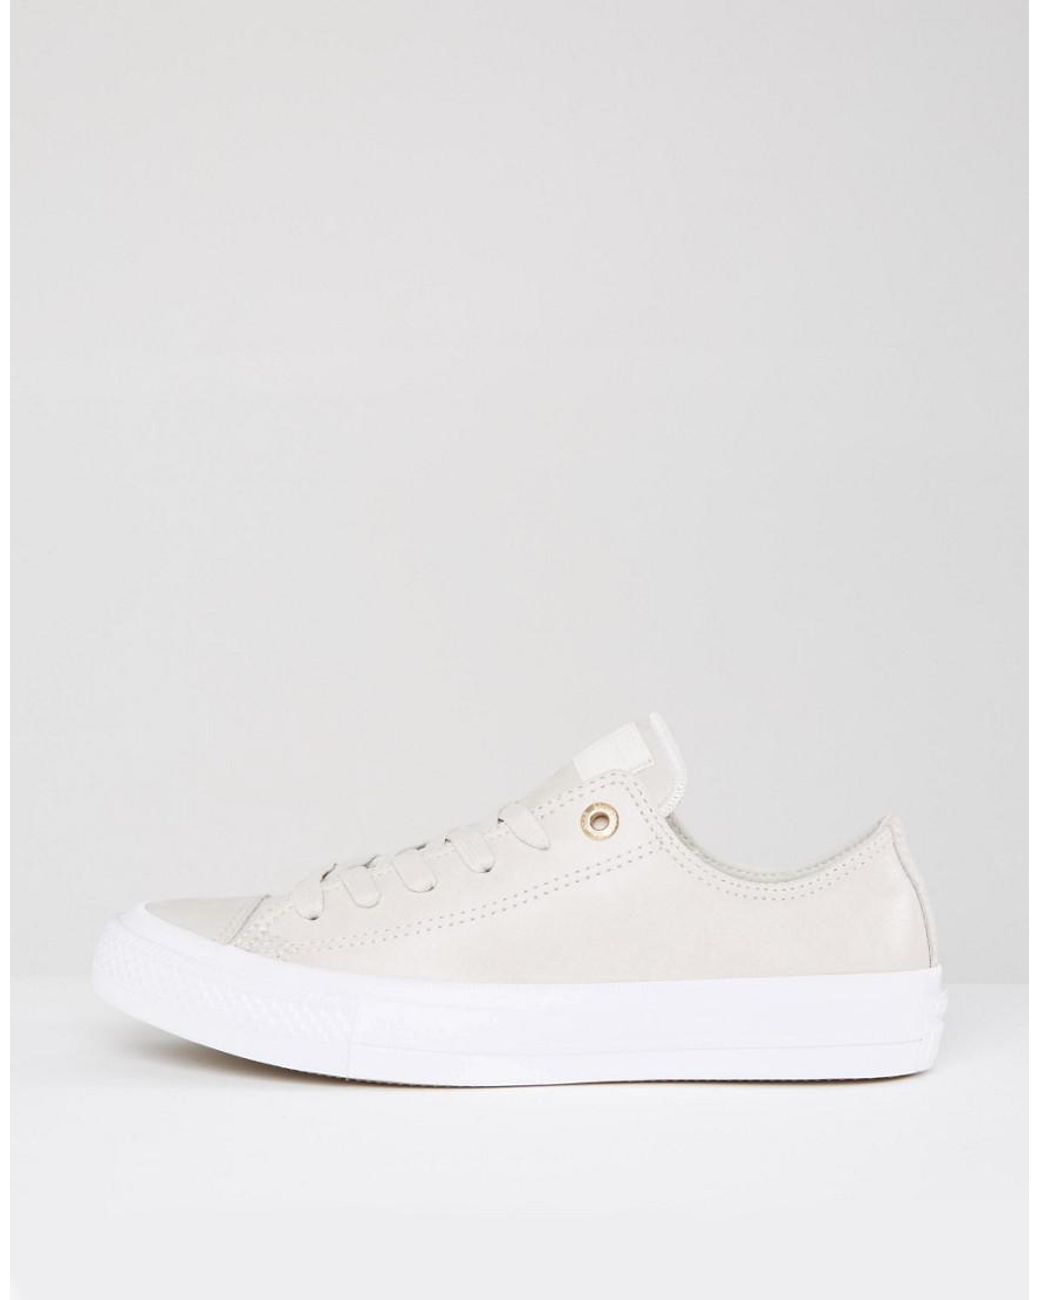 Converse Chuck Ii Trainers In Cream Leather | Lyst